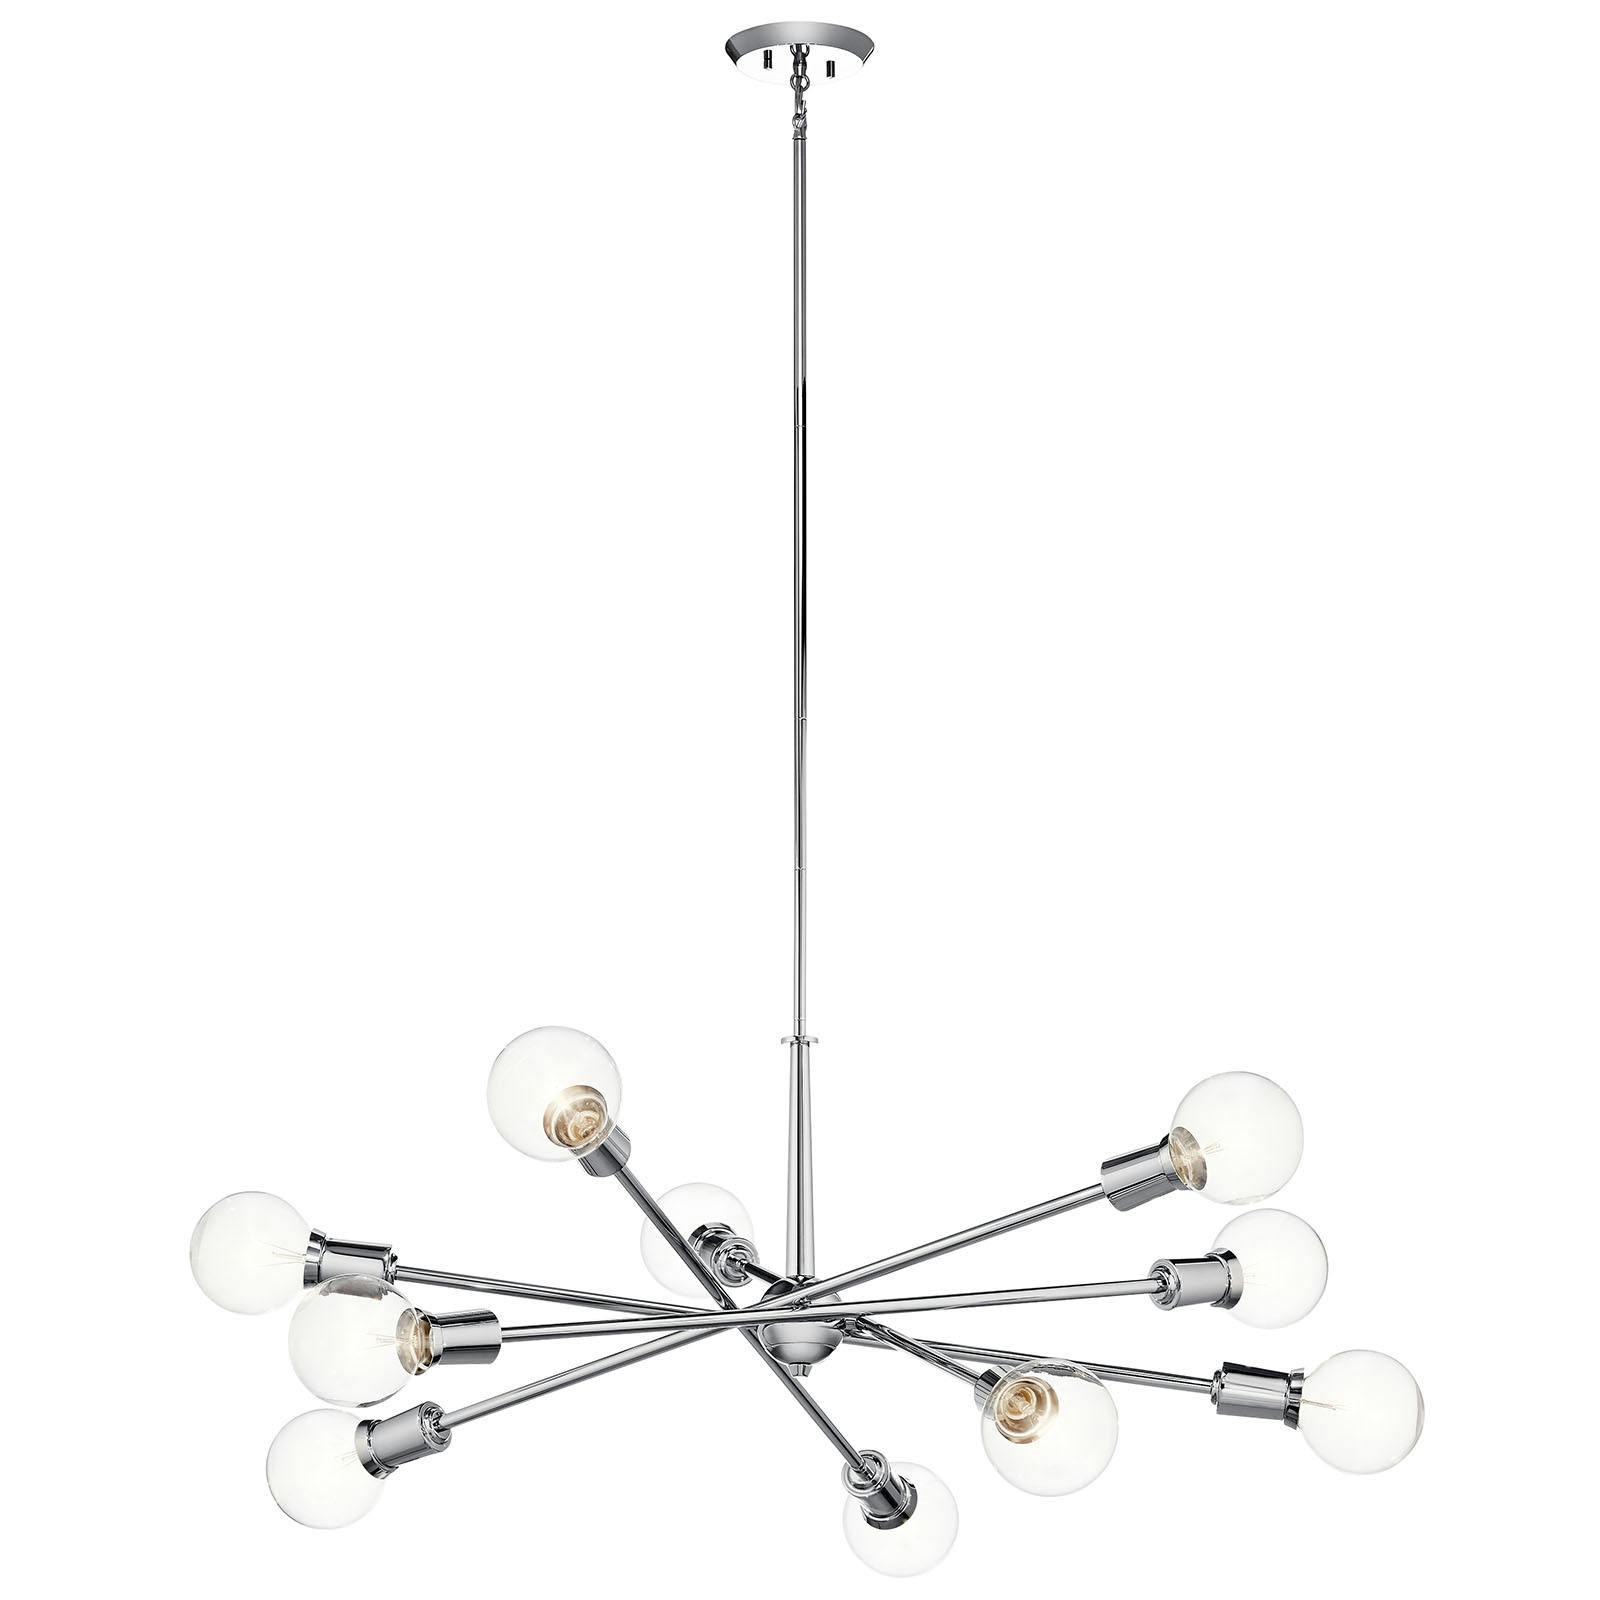 Product image of the 43119CH shown hung horizontally